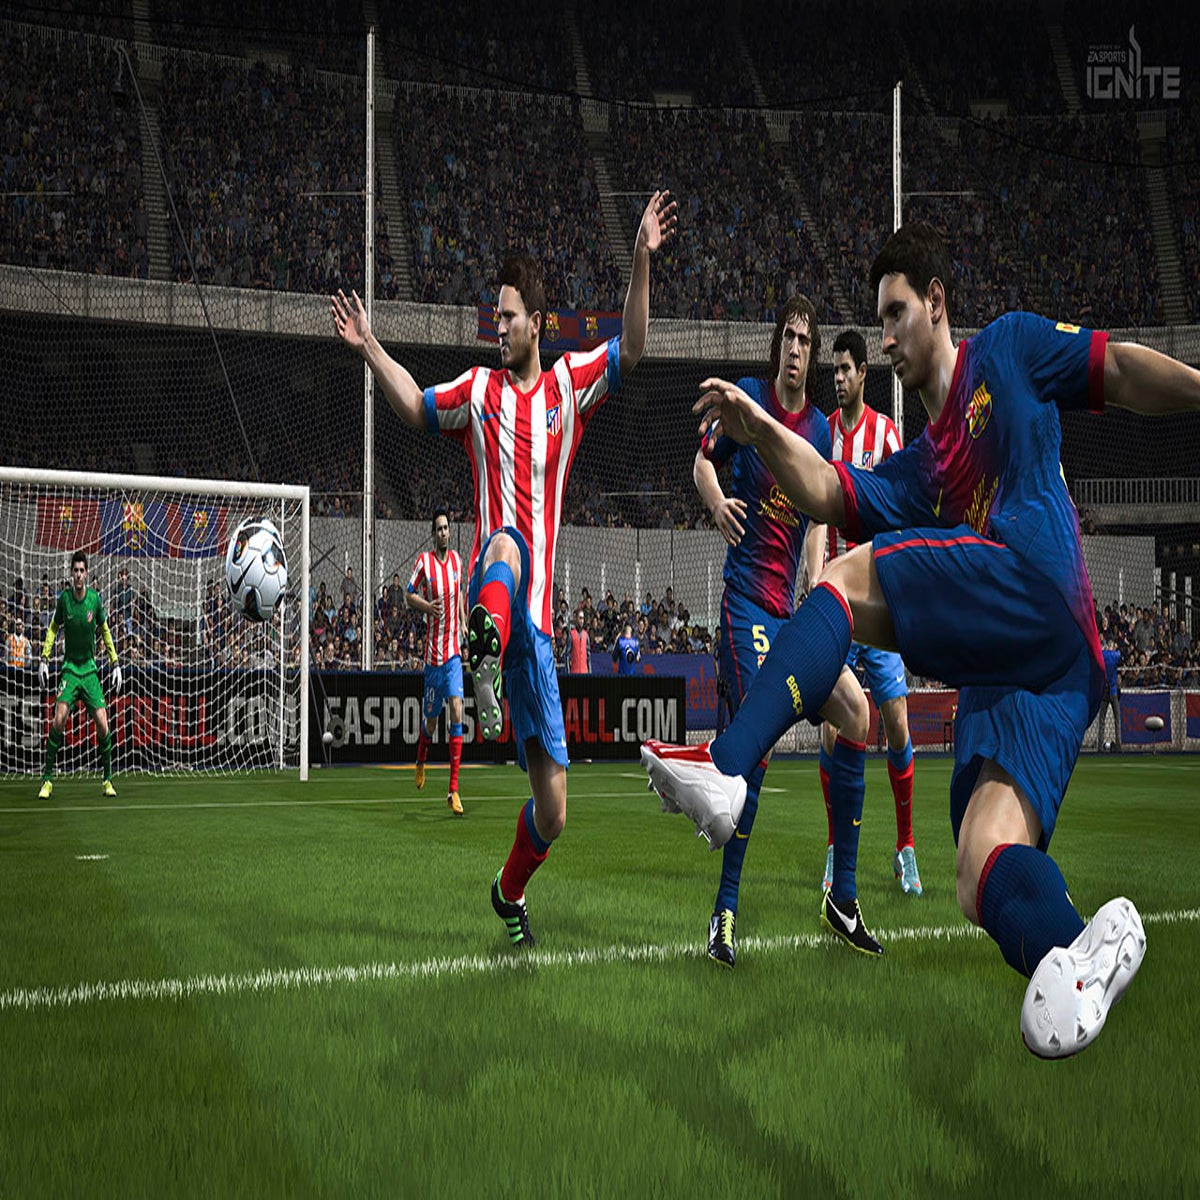 FIFA 18 vs PES 18: Which is better? - Tech Advisor